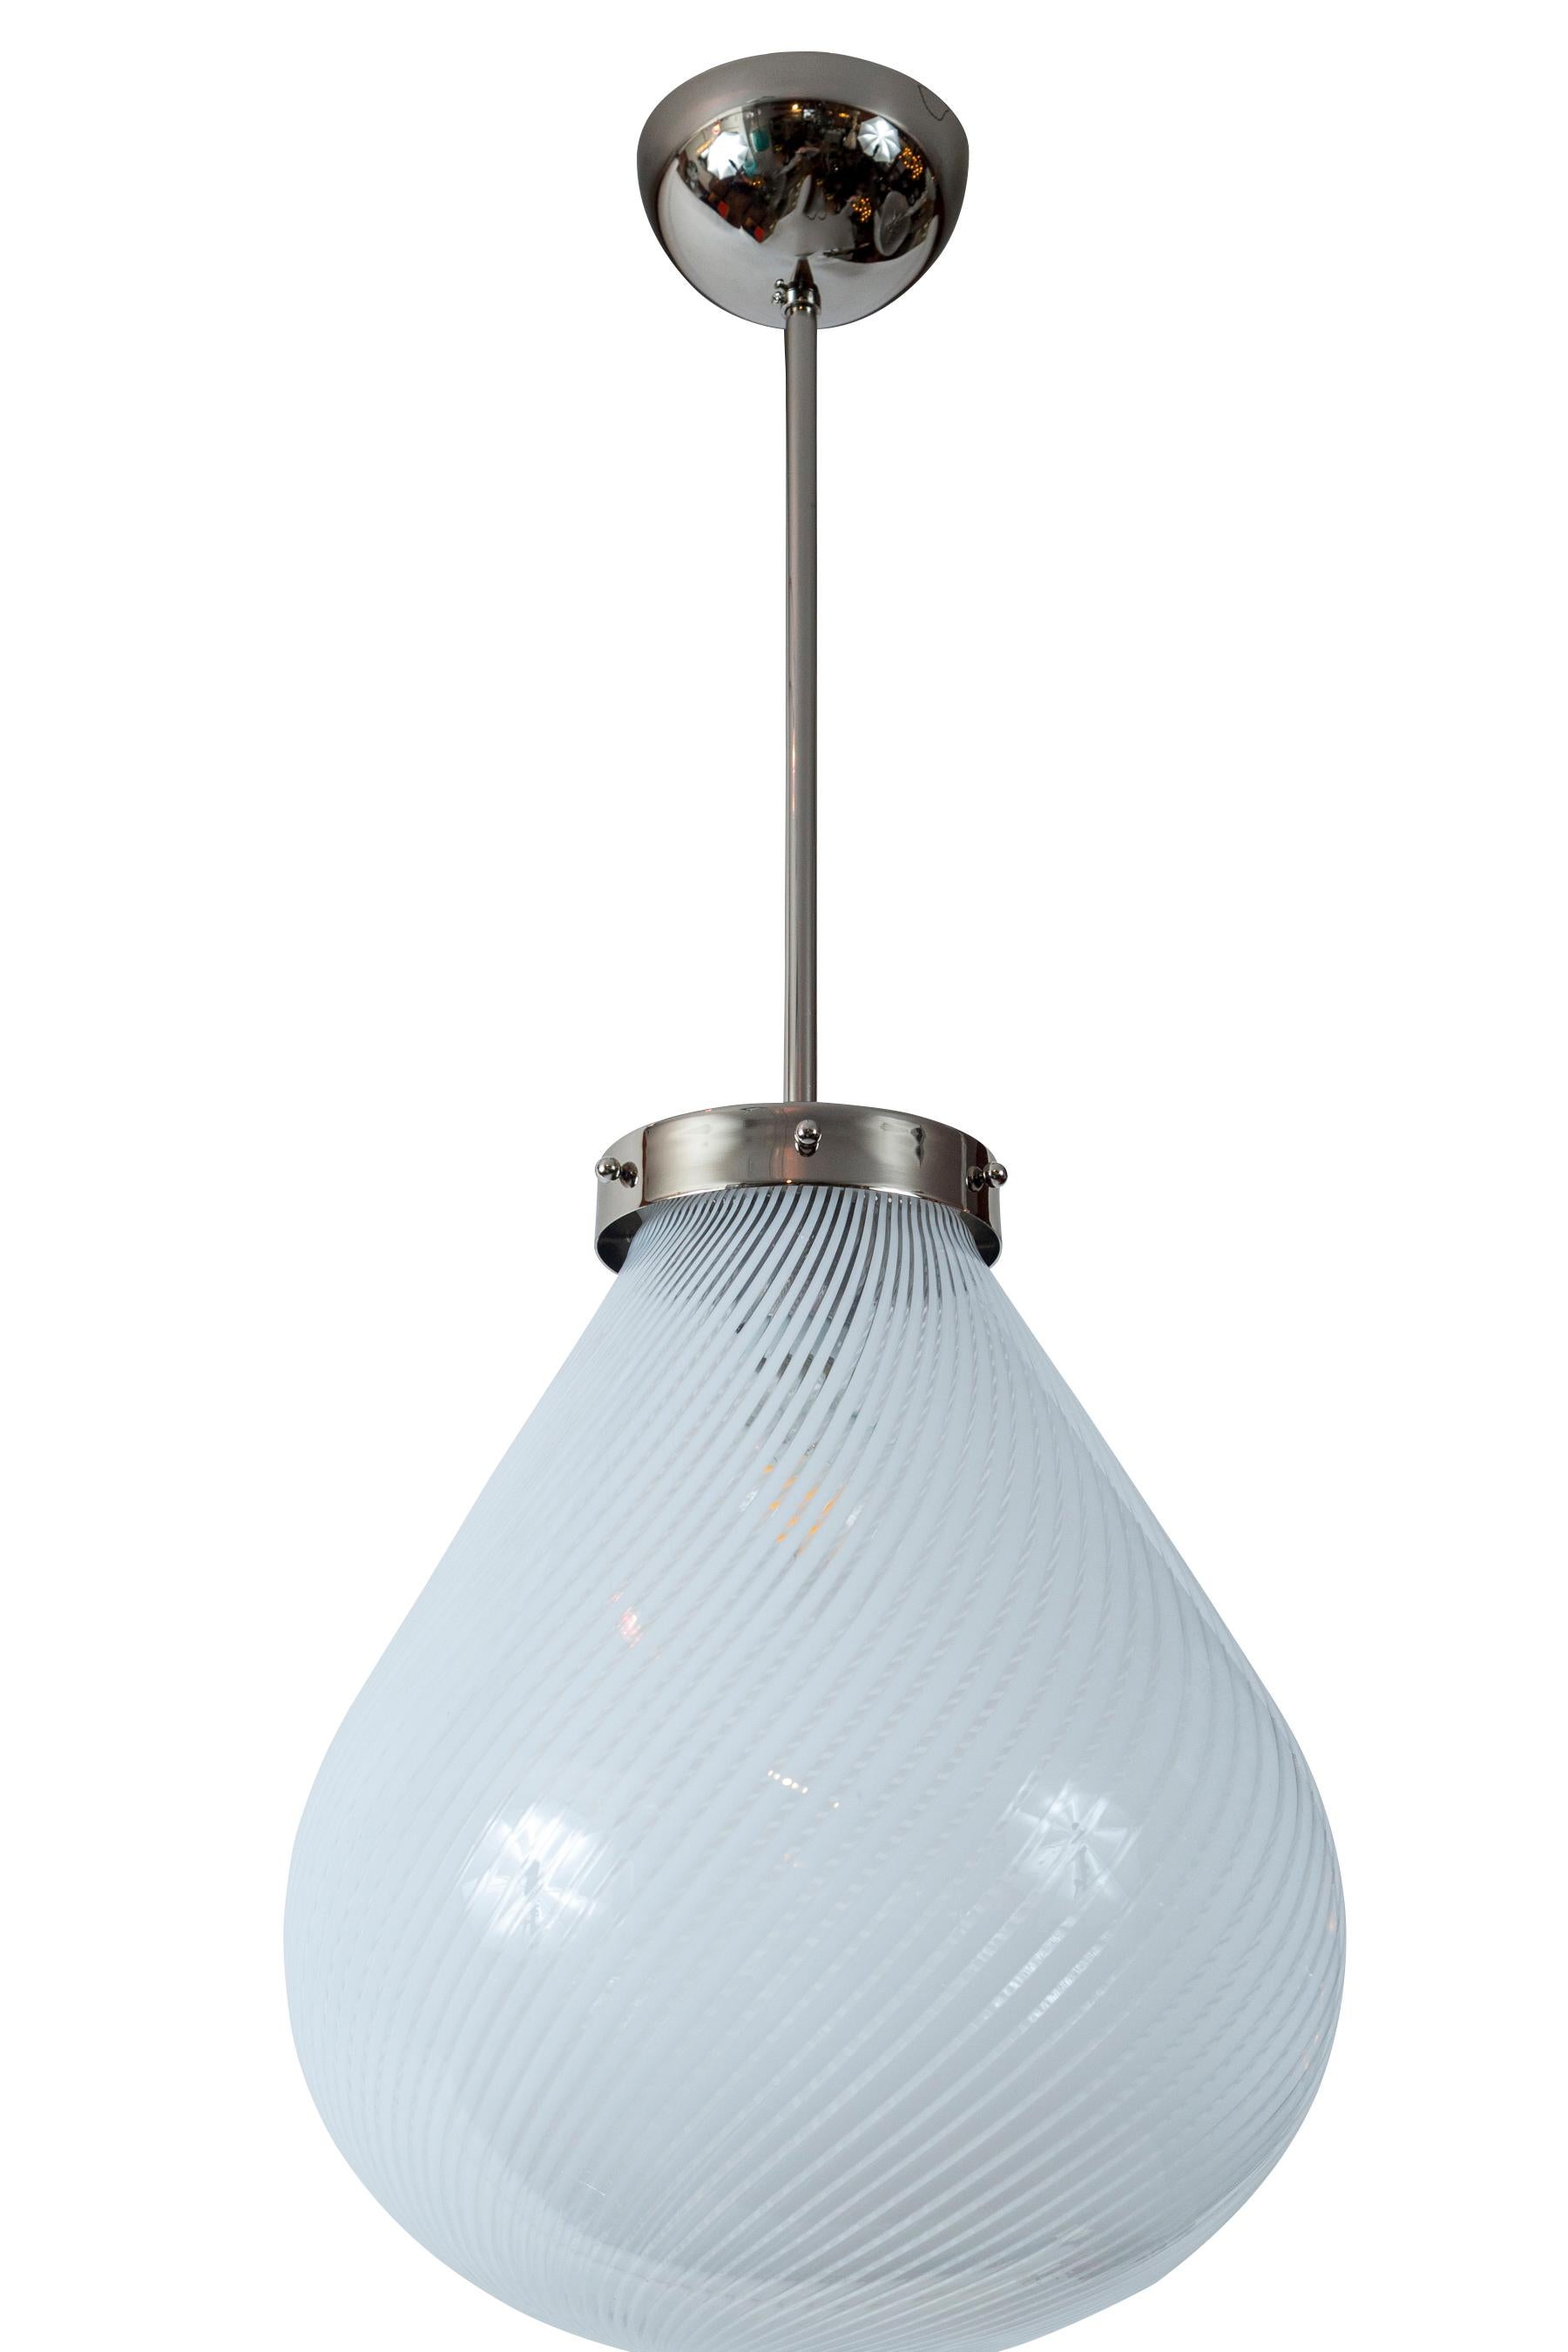 Mid-century glass blown swirl pendant in a unique form, hardware recent in nickel on brass.
UL certified & re-electrified with one single medium base socket for up to 40 watts for an incandescent bulb or higher for with LED

Dimensions: 14?